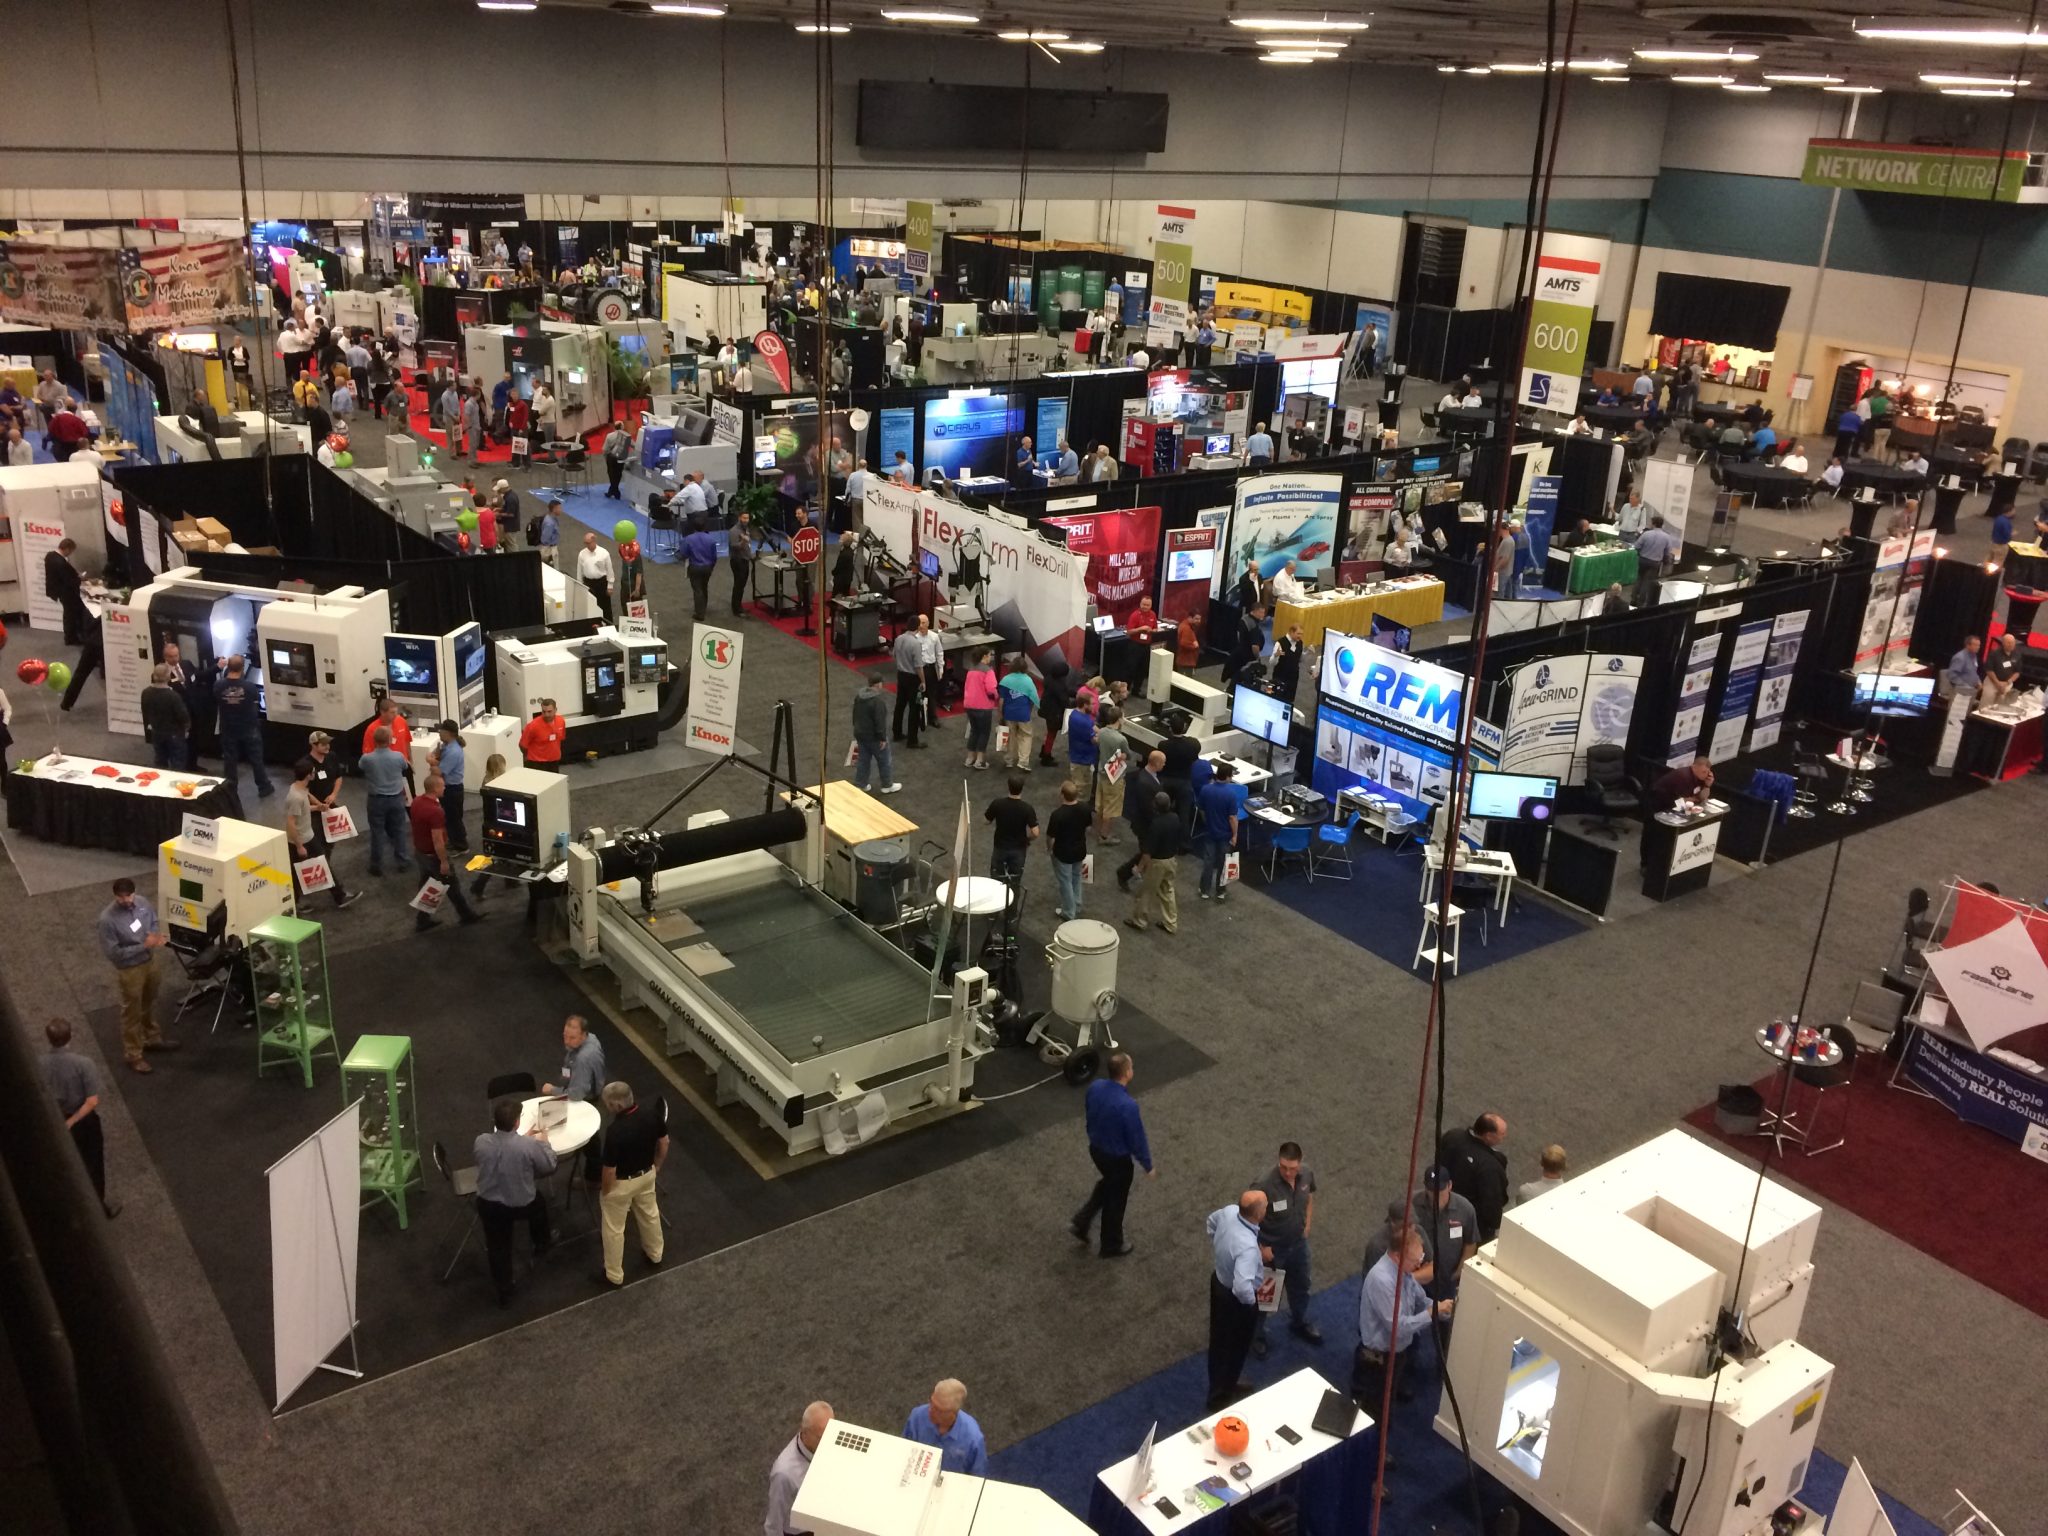 Take a day away from the shop to elevate your game: Attend AMTS 2018 in Dayton